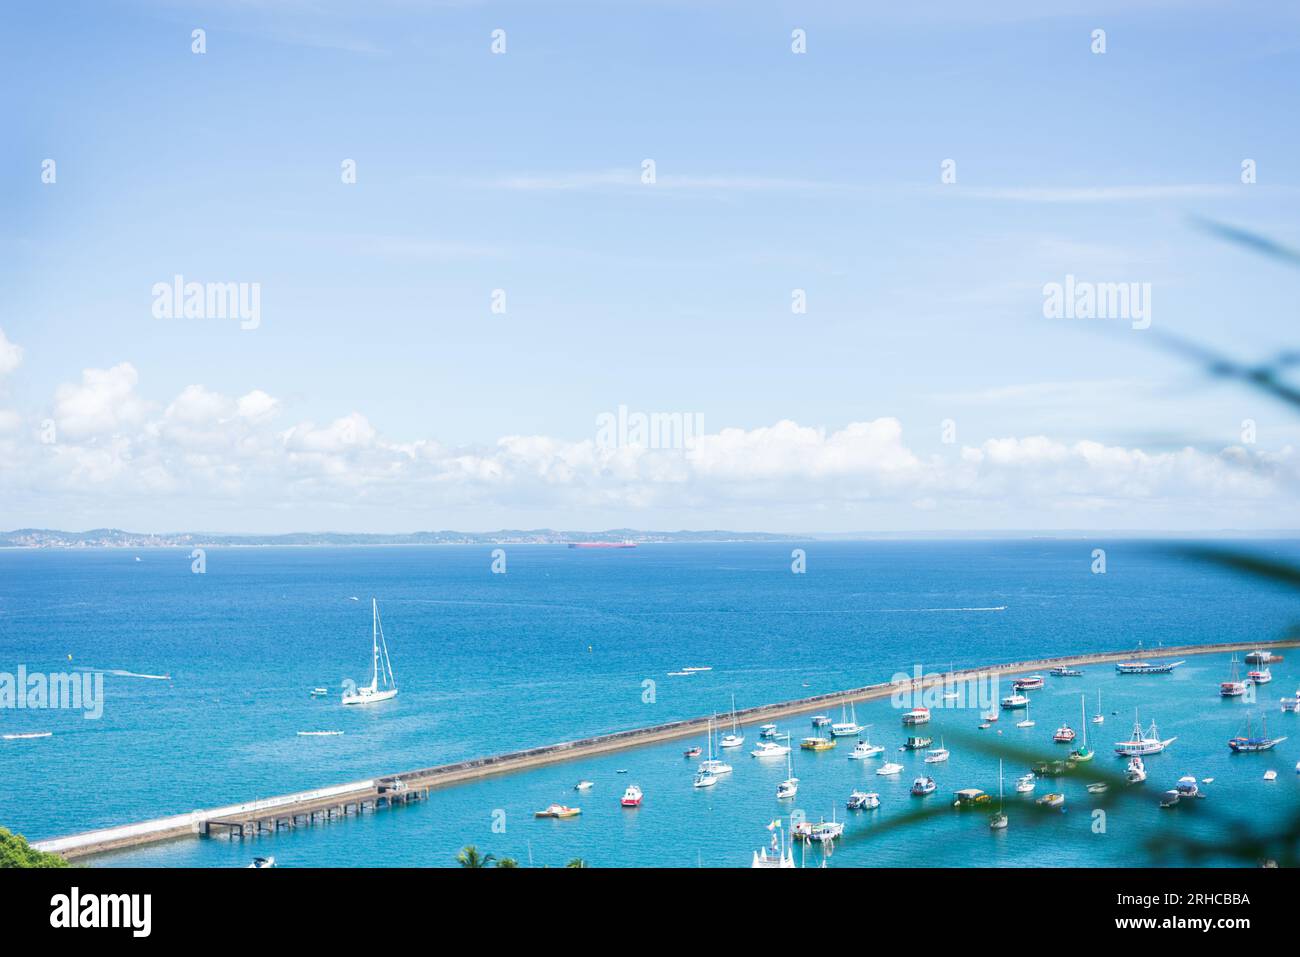 Salvador, Bahia, Brazil - April 02, 2023: View from the top of Todos os Santos bay. Postcard from the city of Salvador in the Brazilian state of Bahia Stock Photo